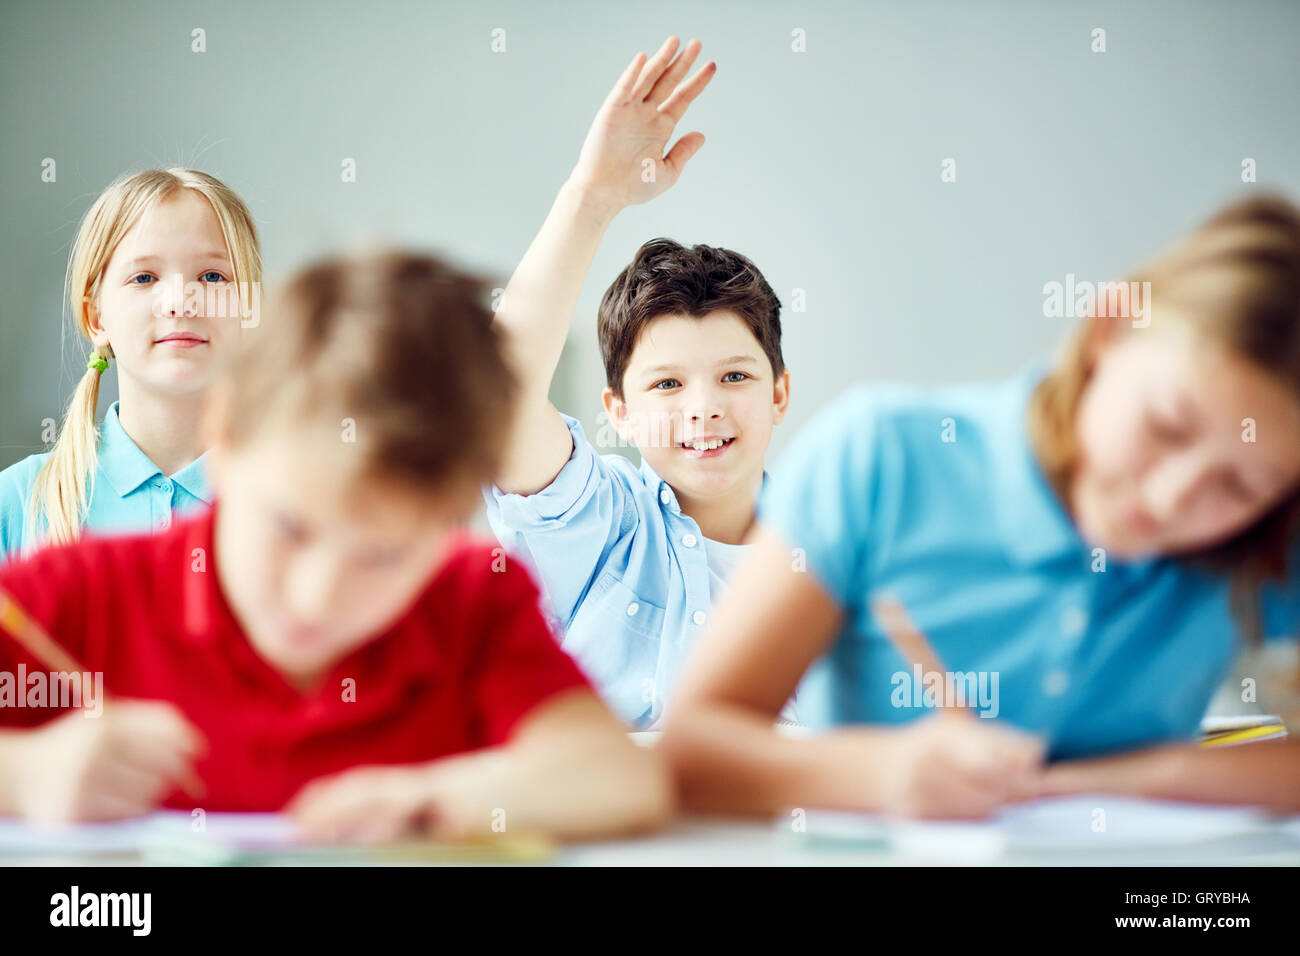 Clever pupil Stock Photo